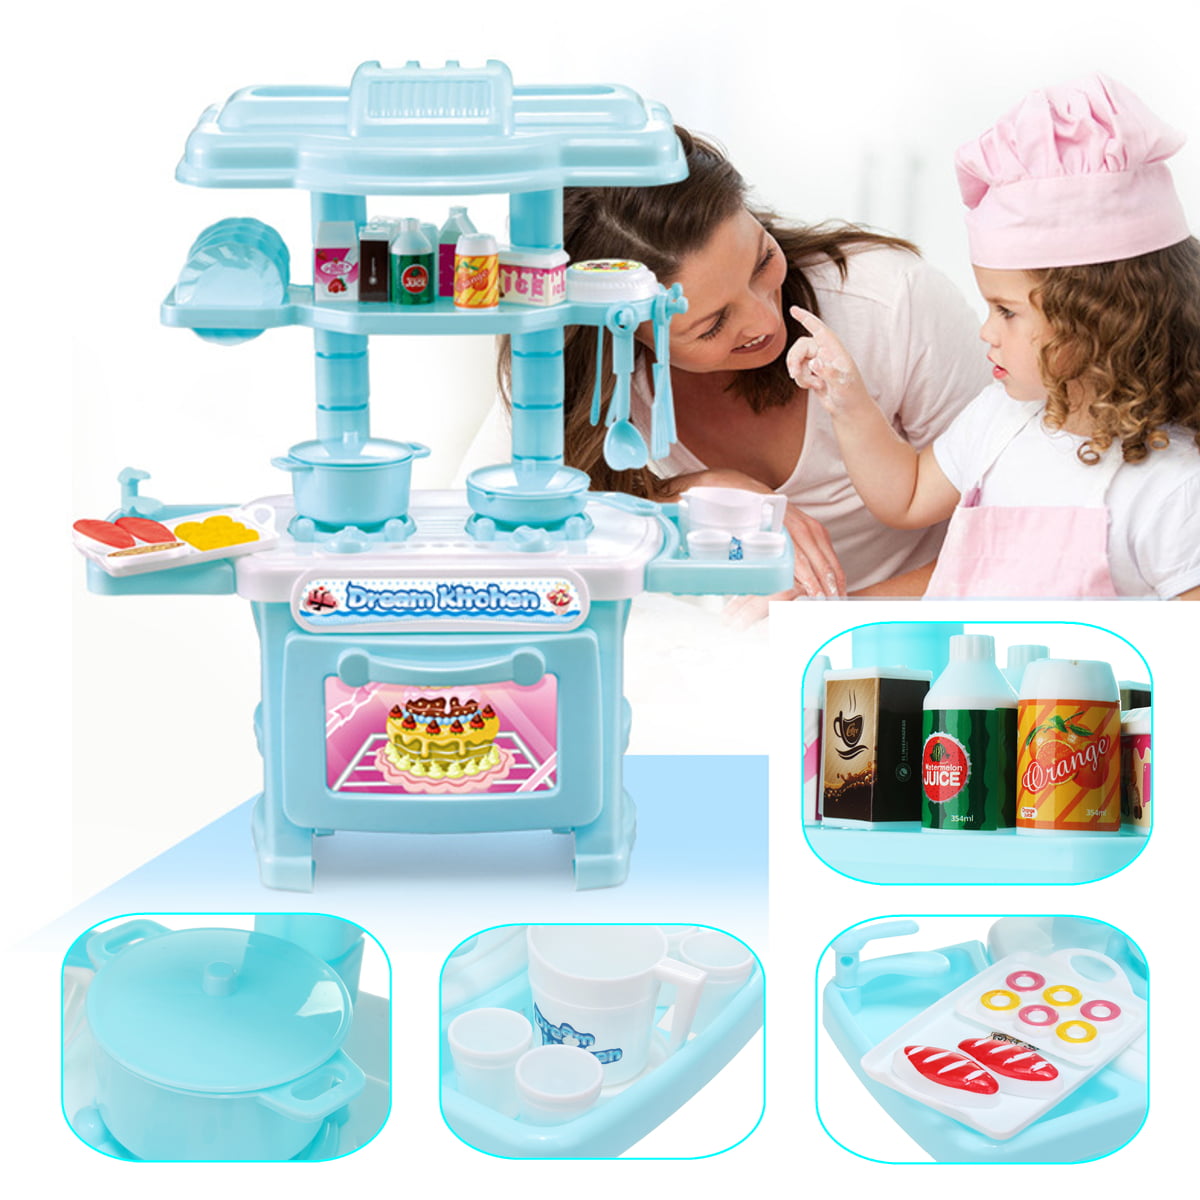 Kids Pretend Role Play Kitchen Cooking Food Boy Girl Toy Cooker Play Utensil Set 